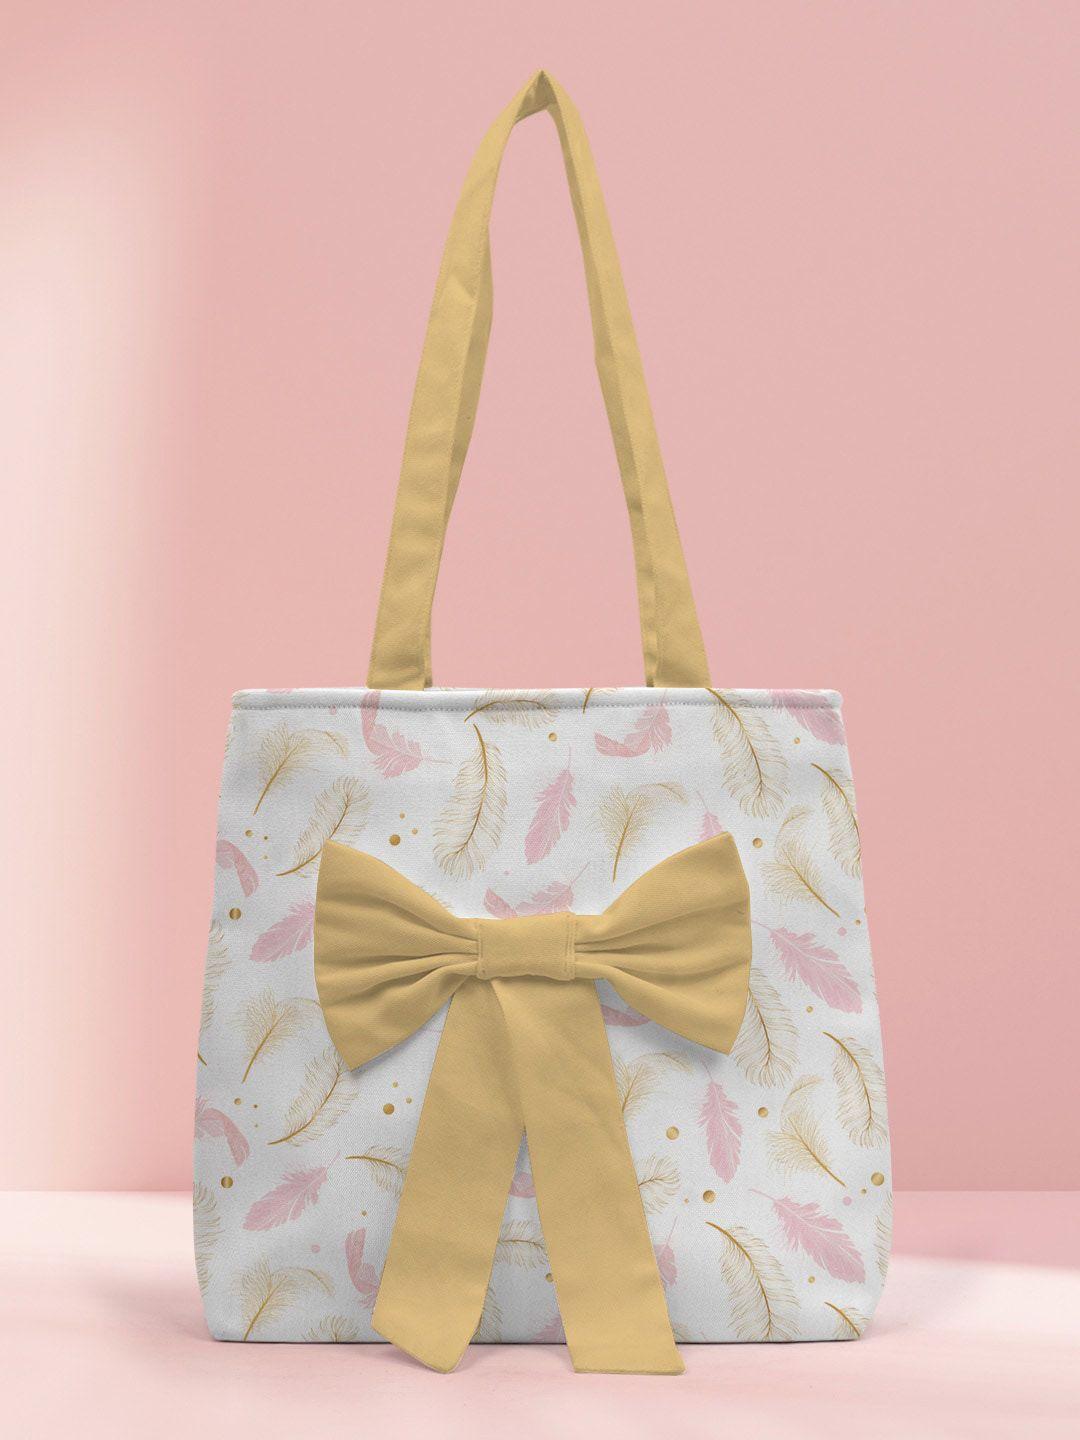 crazy corner floral printed shopper tote bag with bow